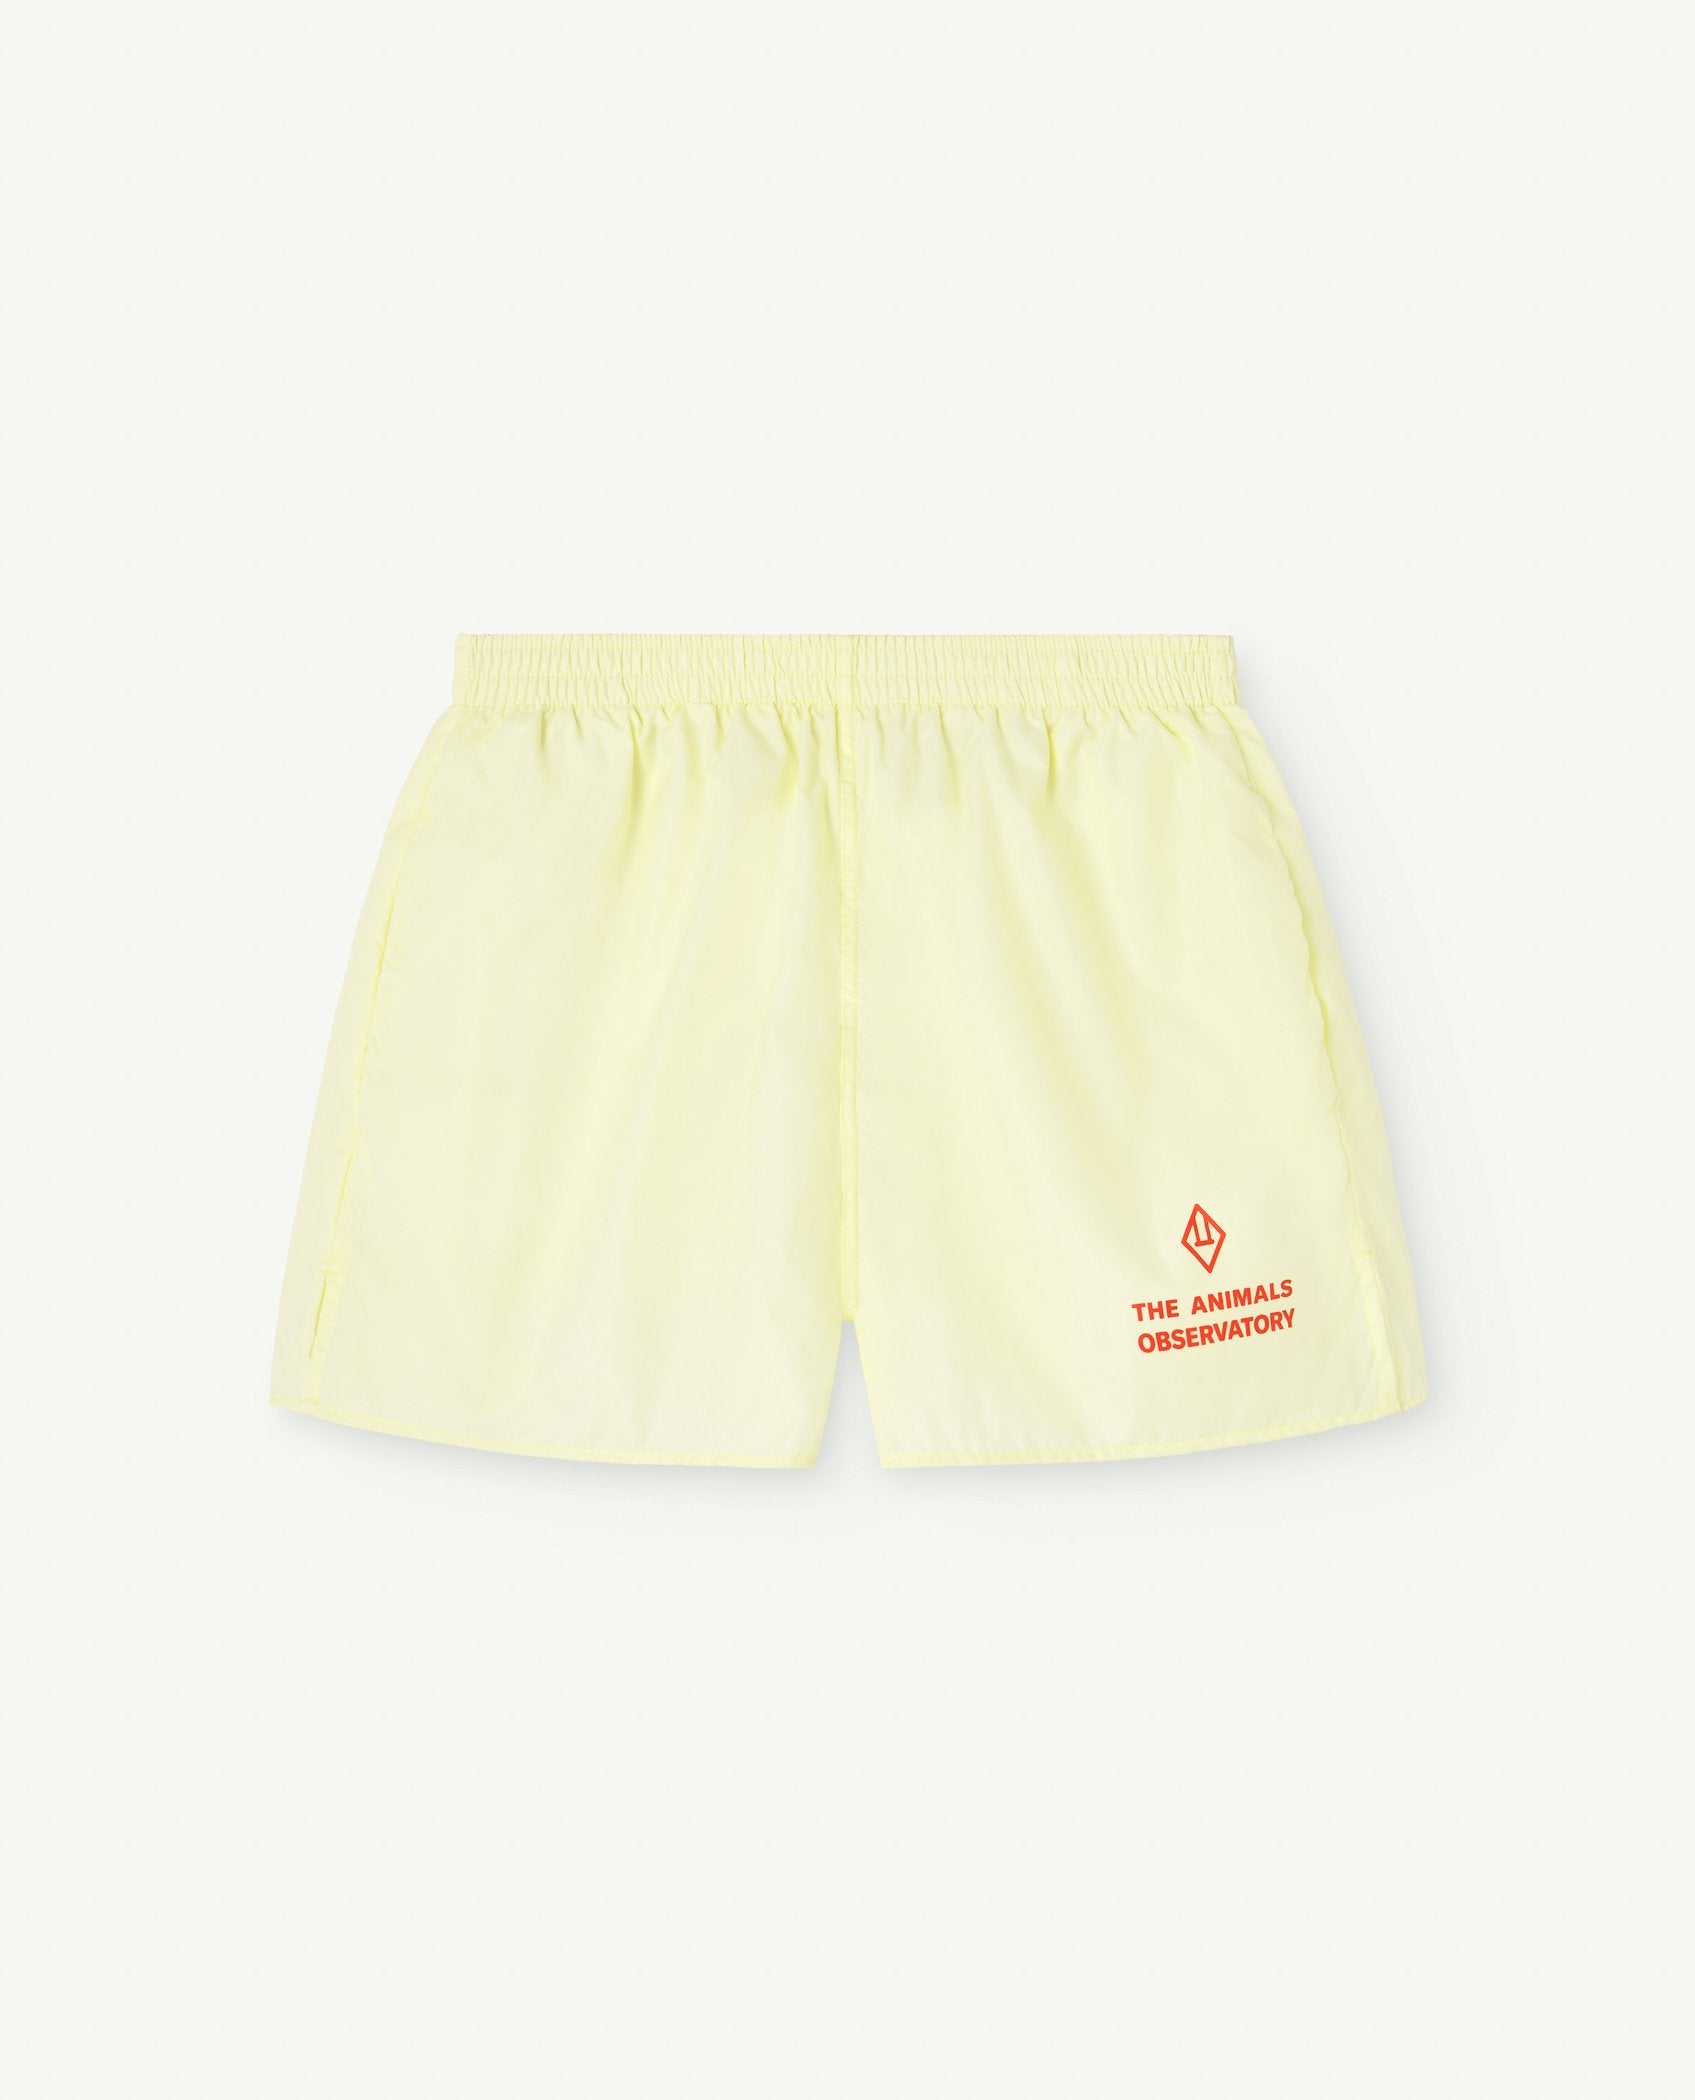 Soft Yellow Lynx Adult Shorts PRODUCT FRONT